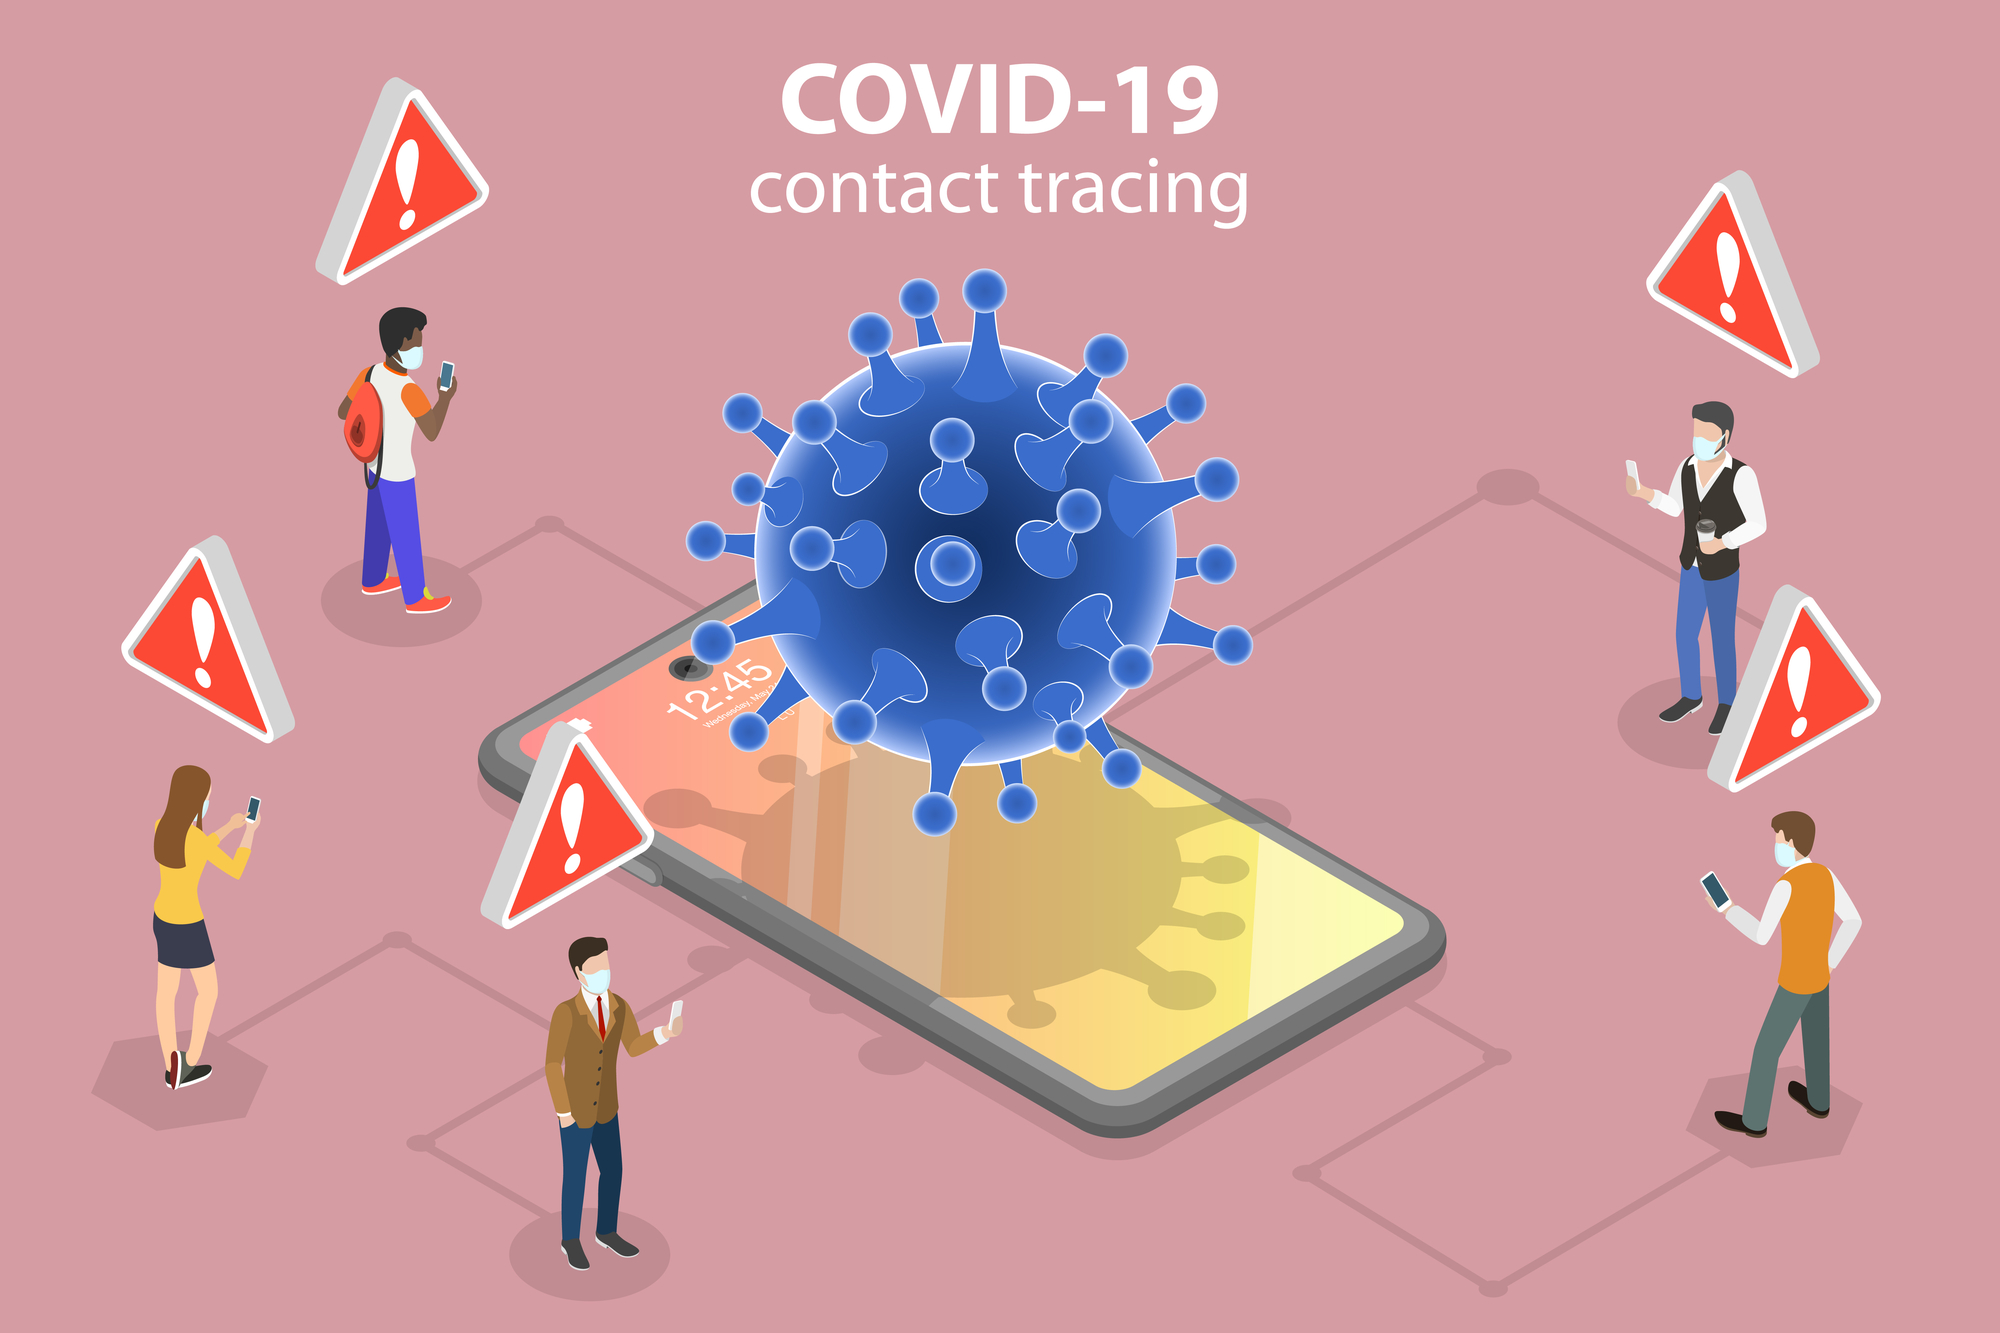 Graphic of a COVID-19 virus floating on a smartphone, with people standing around it wearing masks and holding smartphones. Red triangle exclamation point icons float above their heads.